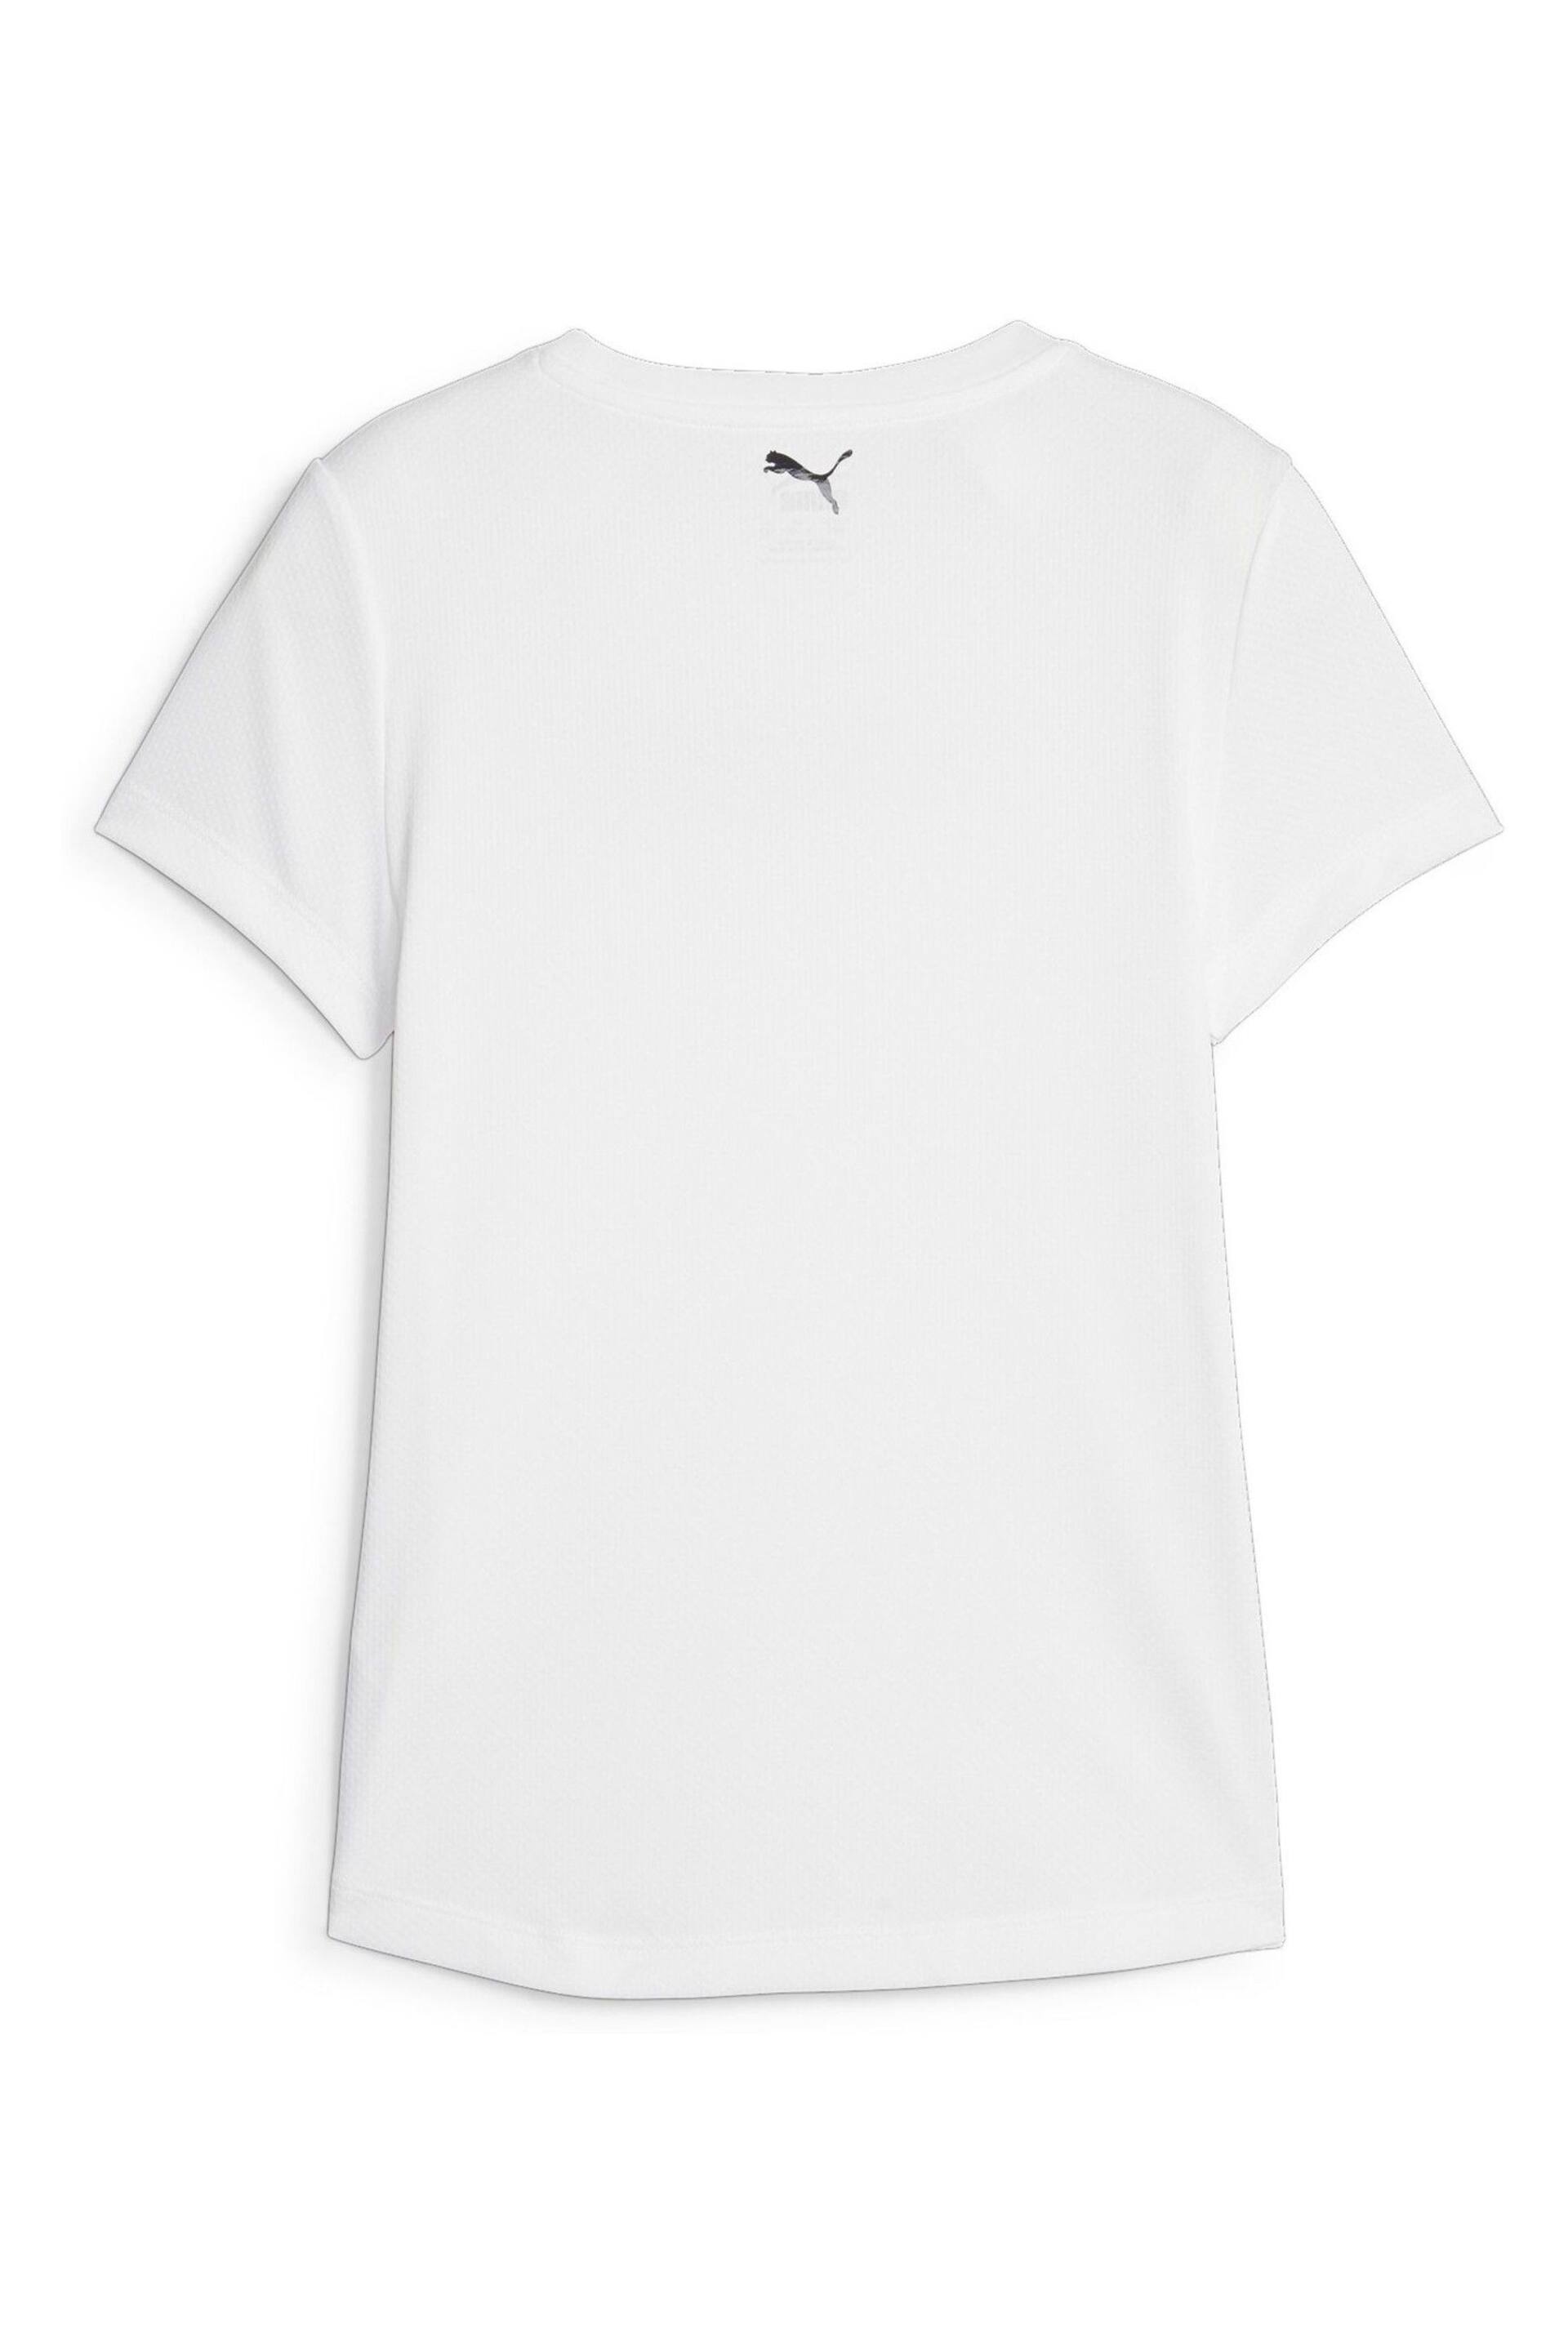 Puma White FIT Youth T-Shirt - Image 5 of 5